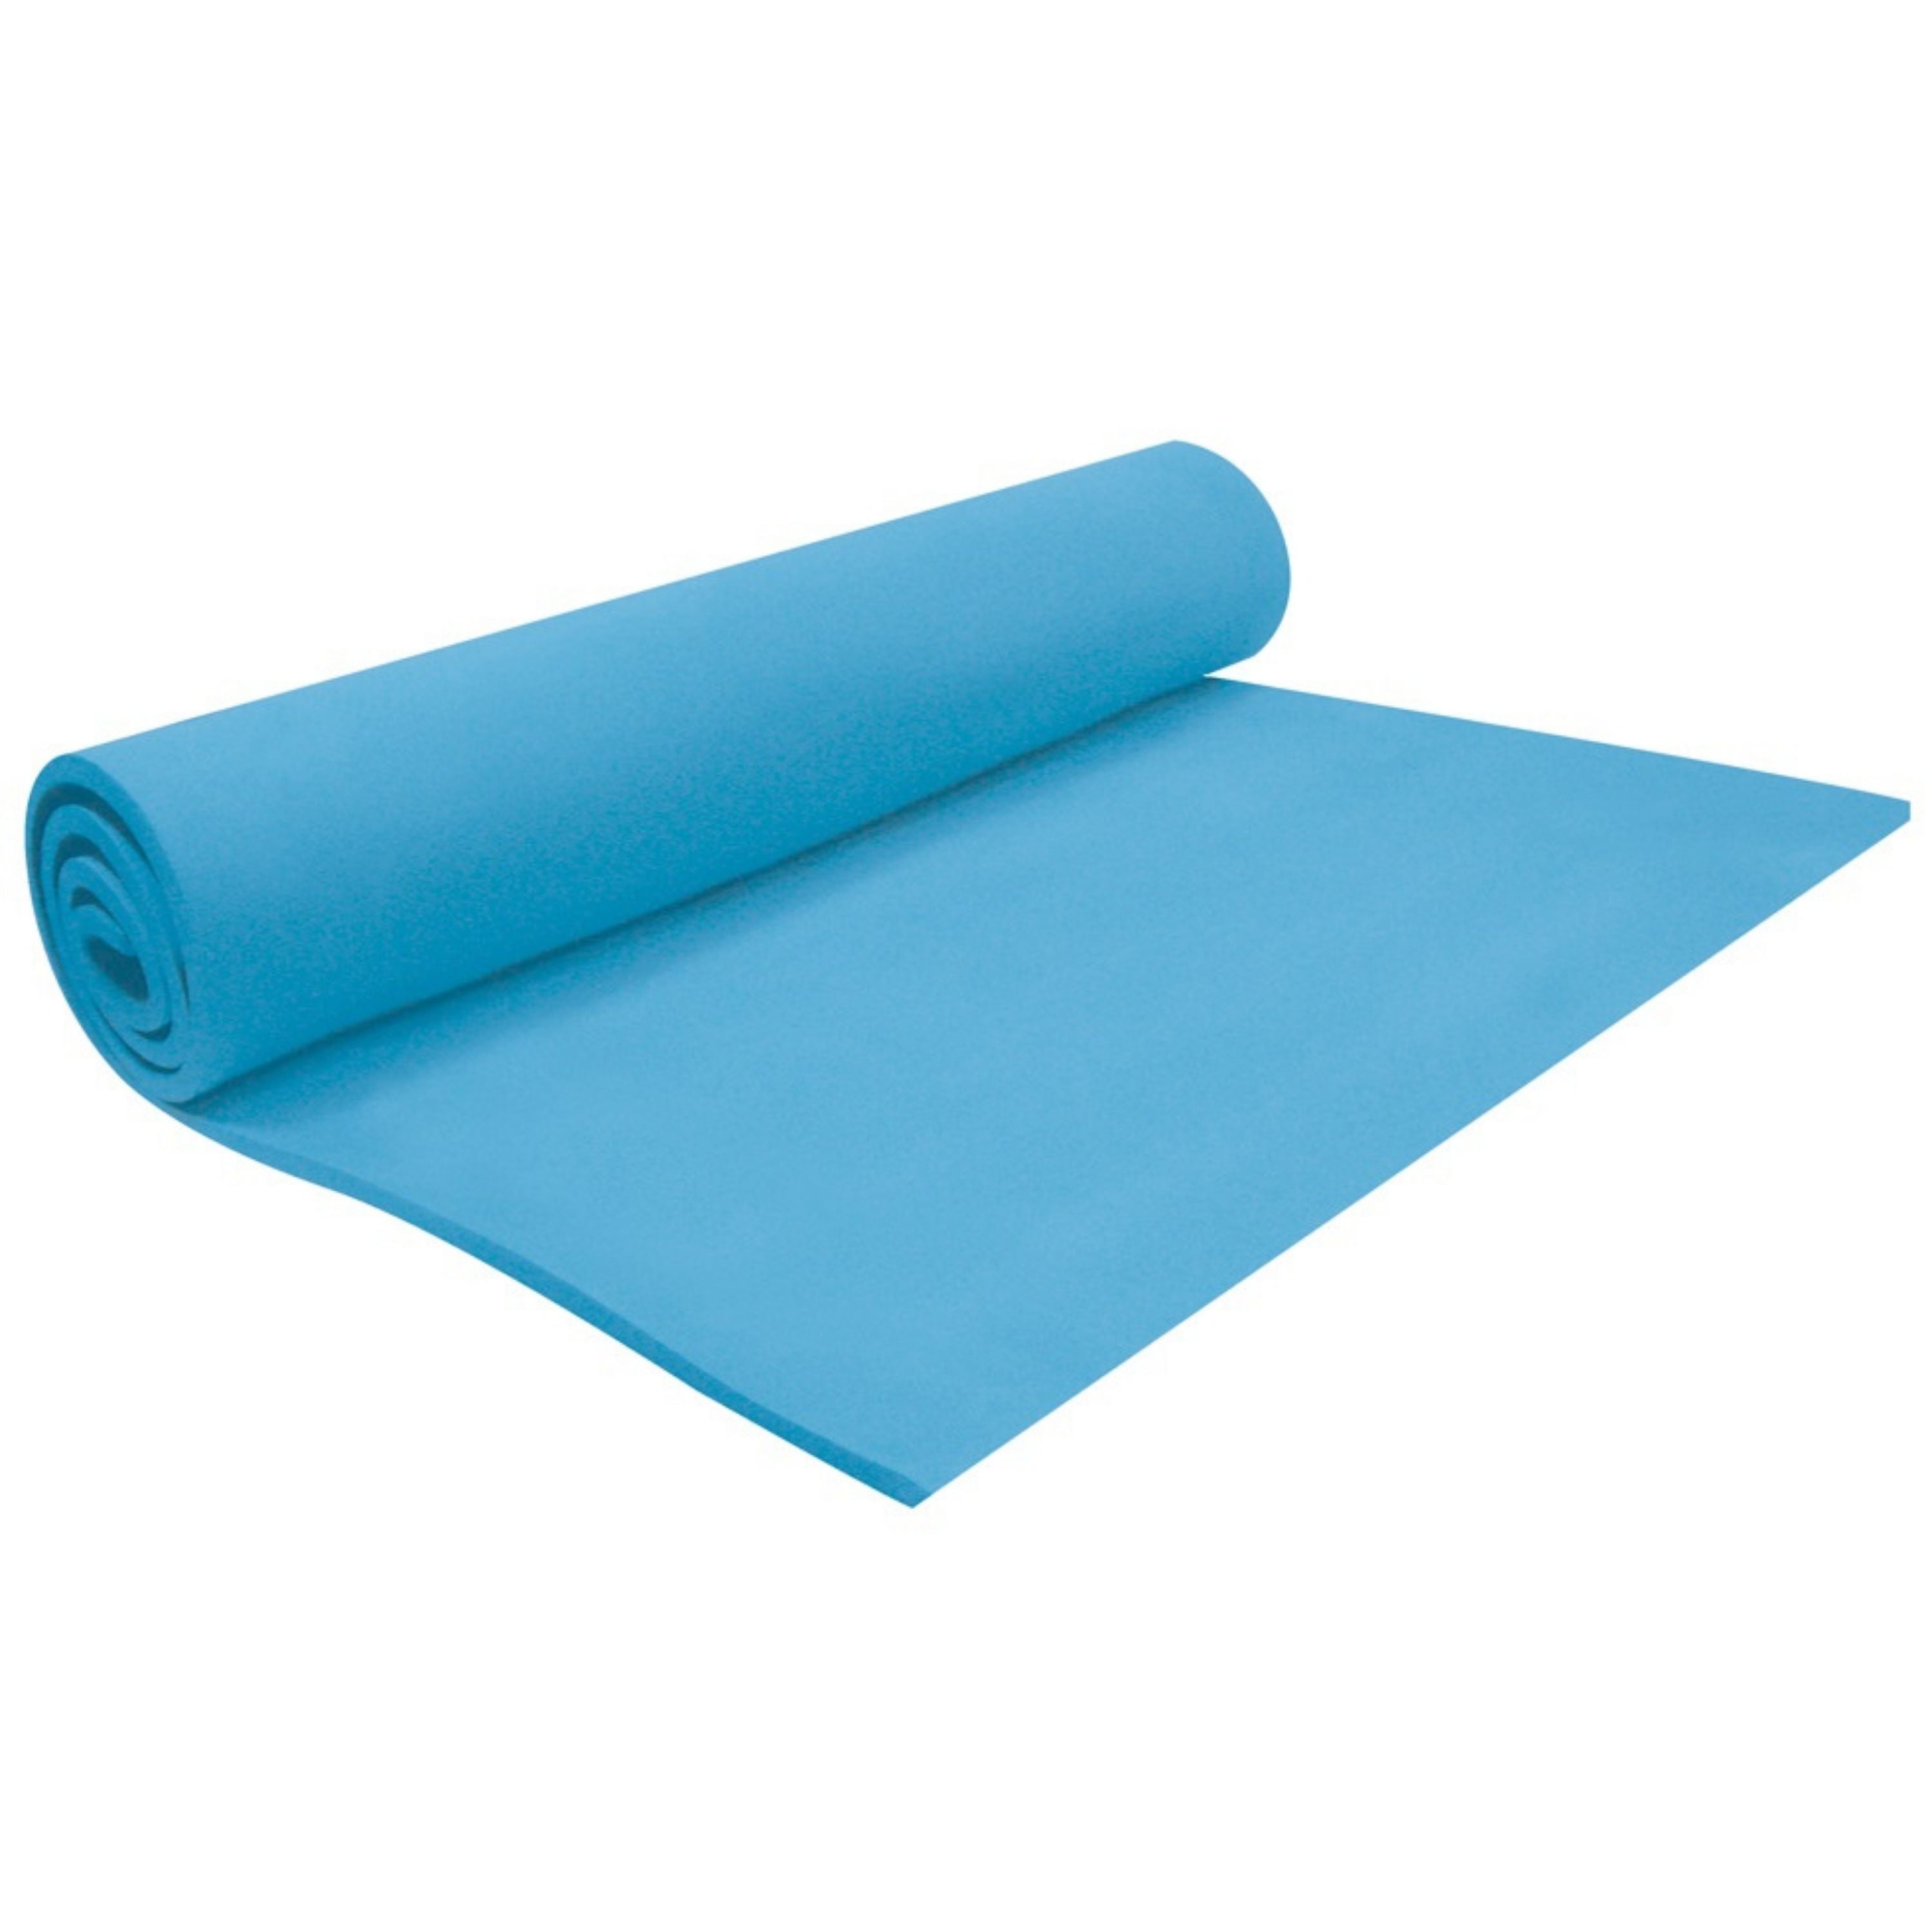 Matelas de camping et d'exercices double 24 X 72||Single camping and exercise mattress 24 X 72